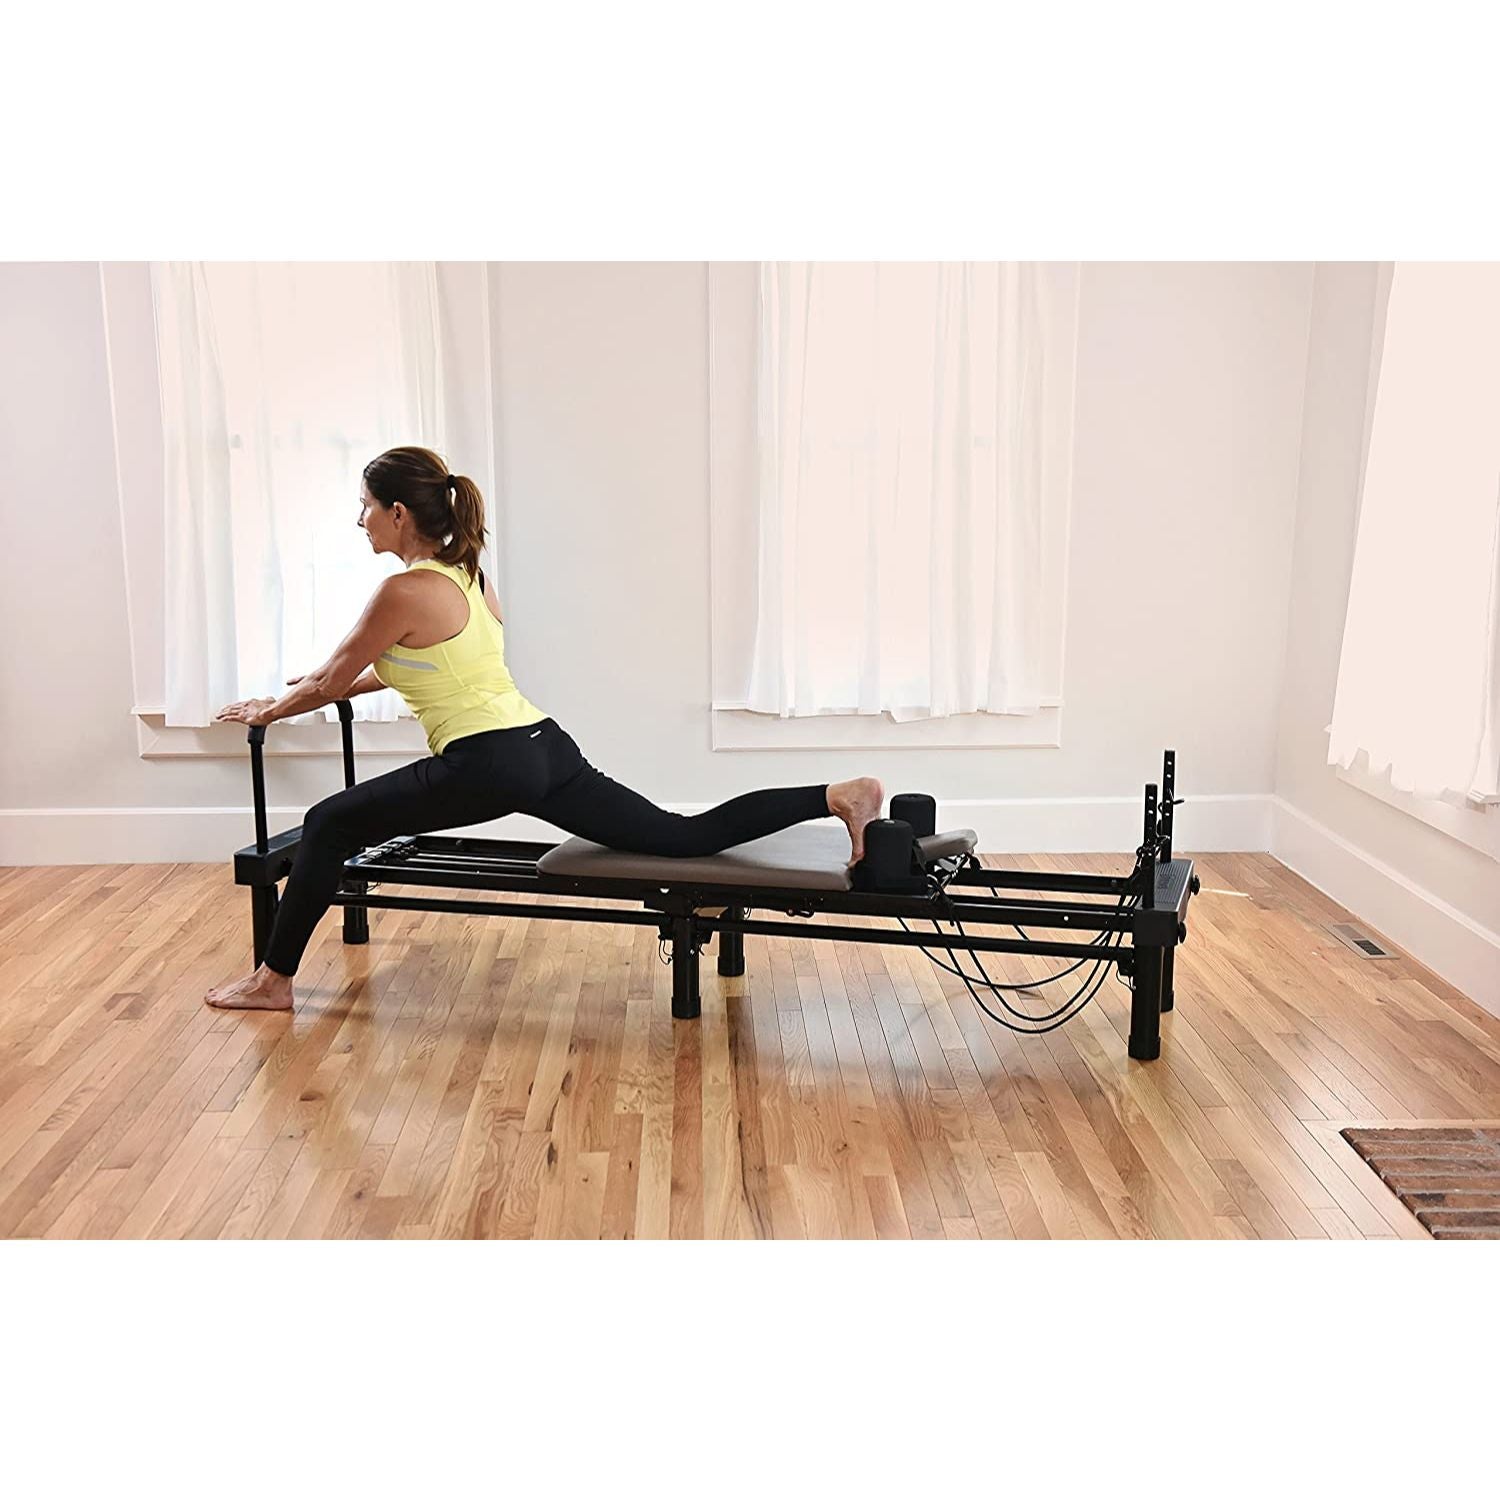 Buy Peak Pilates Fit Reformer Machine with Free Shipping – Pilates